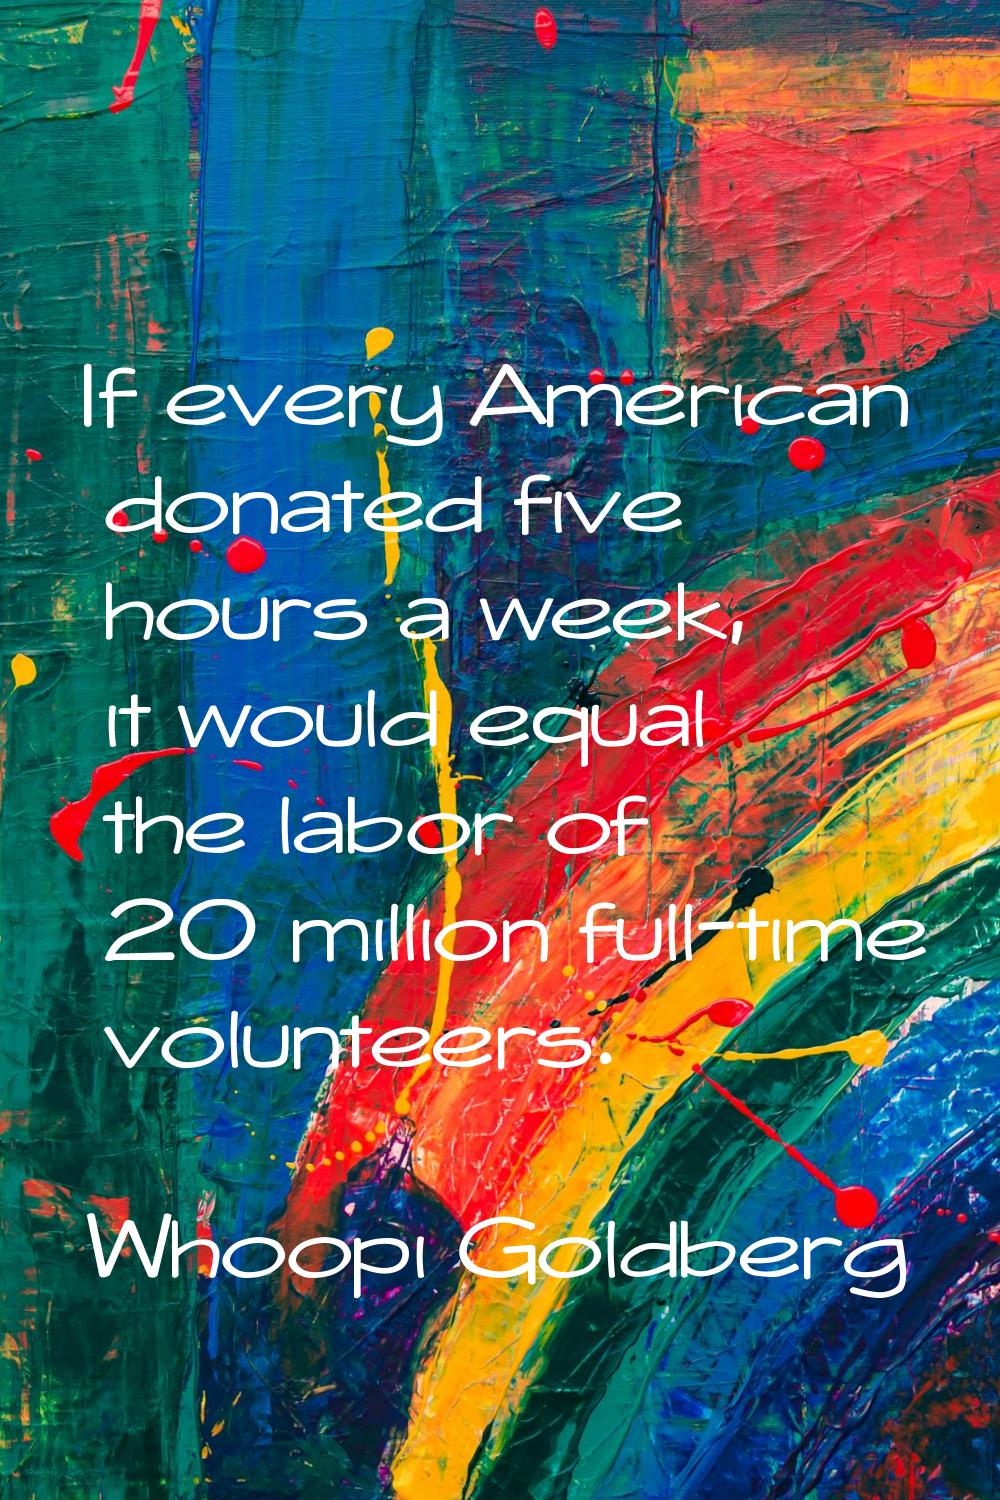 If every American donated five hours a week, it would equal the labor of 20 million full-time volun